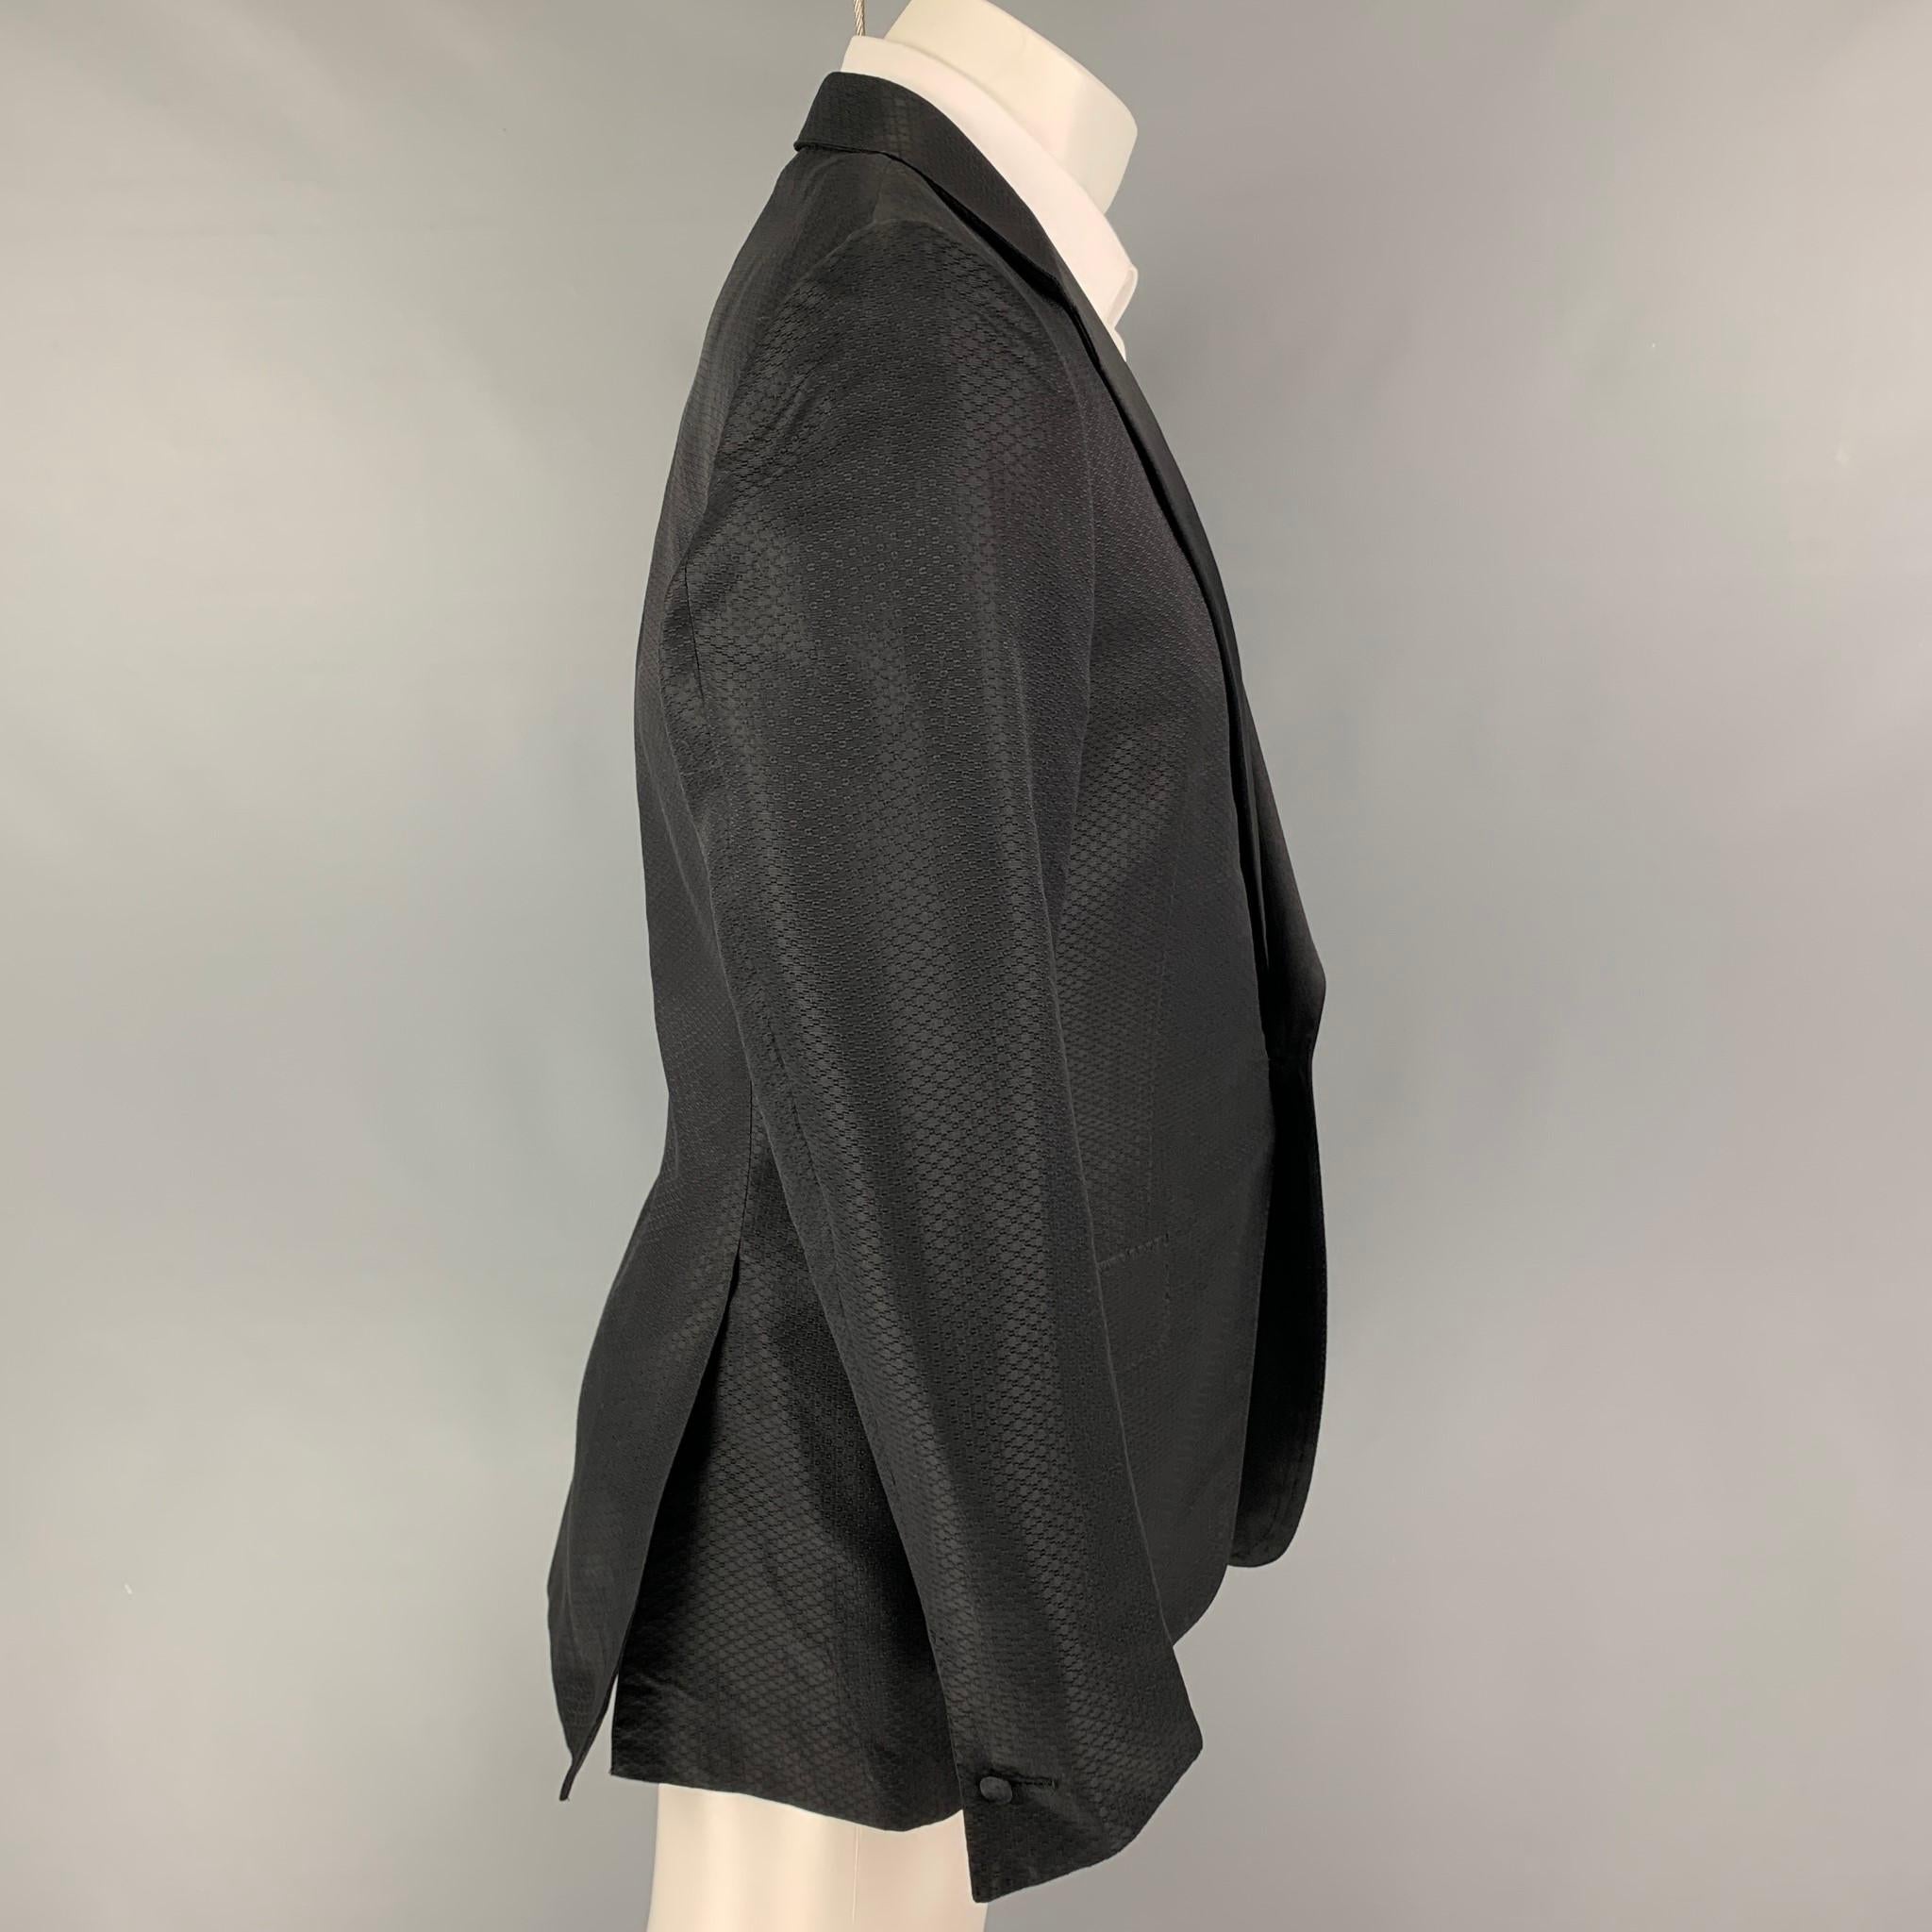 YVES SAINT LAURENT by Tom Ford sport coat comes in a black textured / silk featuring a notch lapel, flap pockets, double back vent, and a single button closure. Made in Italy. 

Very Good Pre-Owned Condition.
Marked: 50

Measurements:

Shoulder: 17